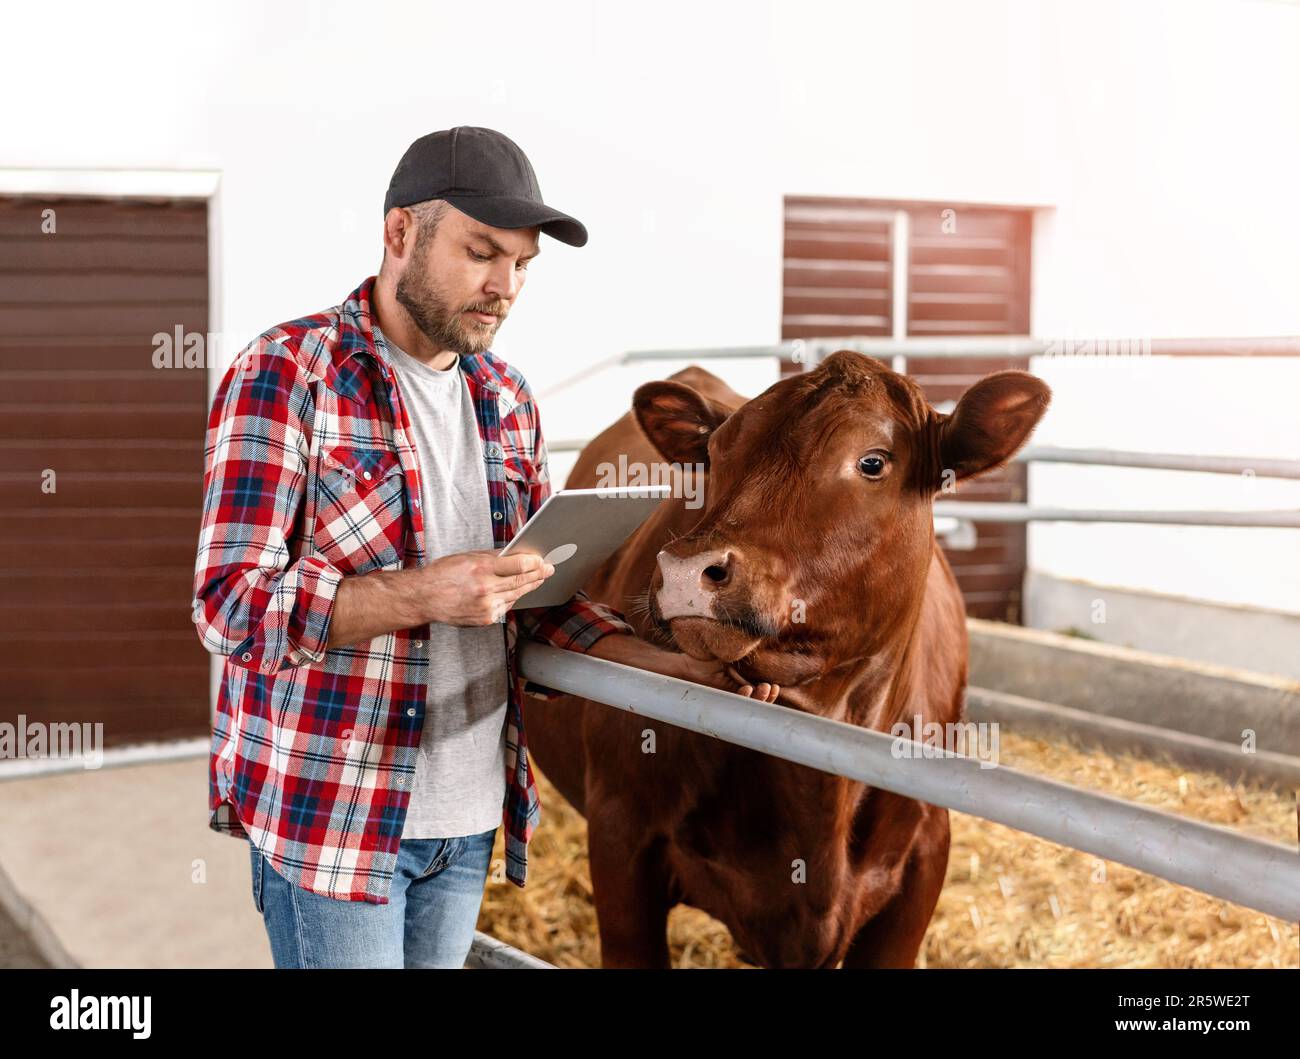 Farmer cow breeder standing next to a cow and using digital tablet inside the cowshed. Stock Photo